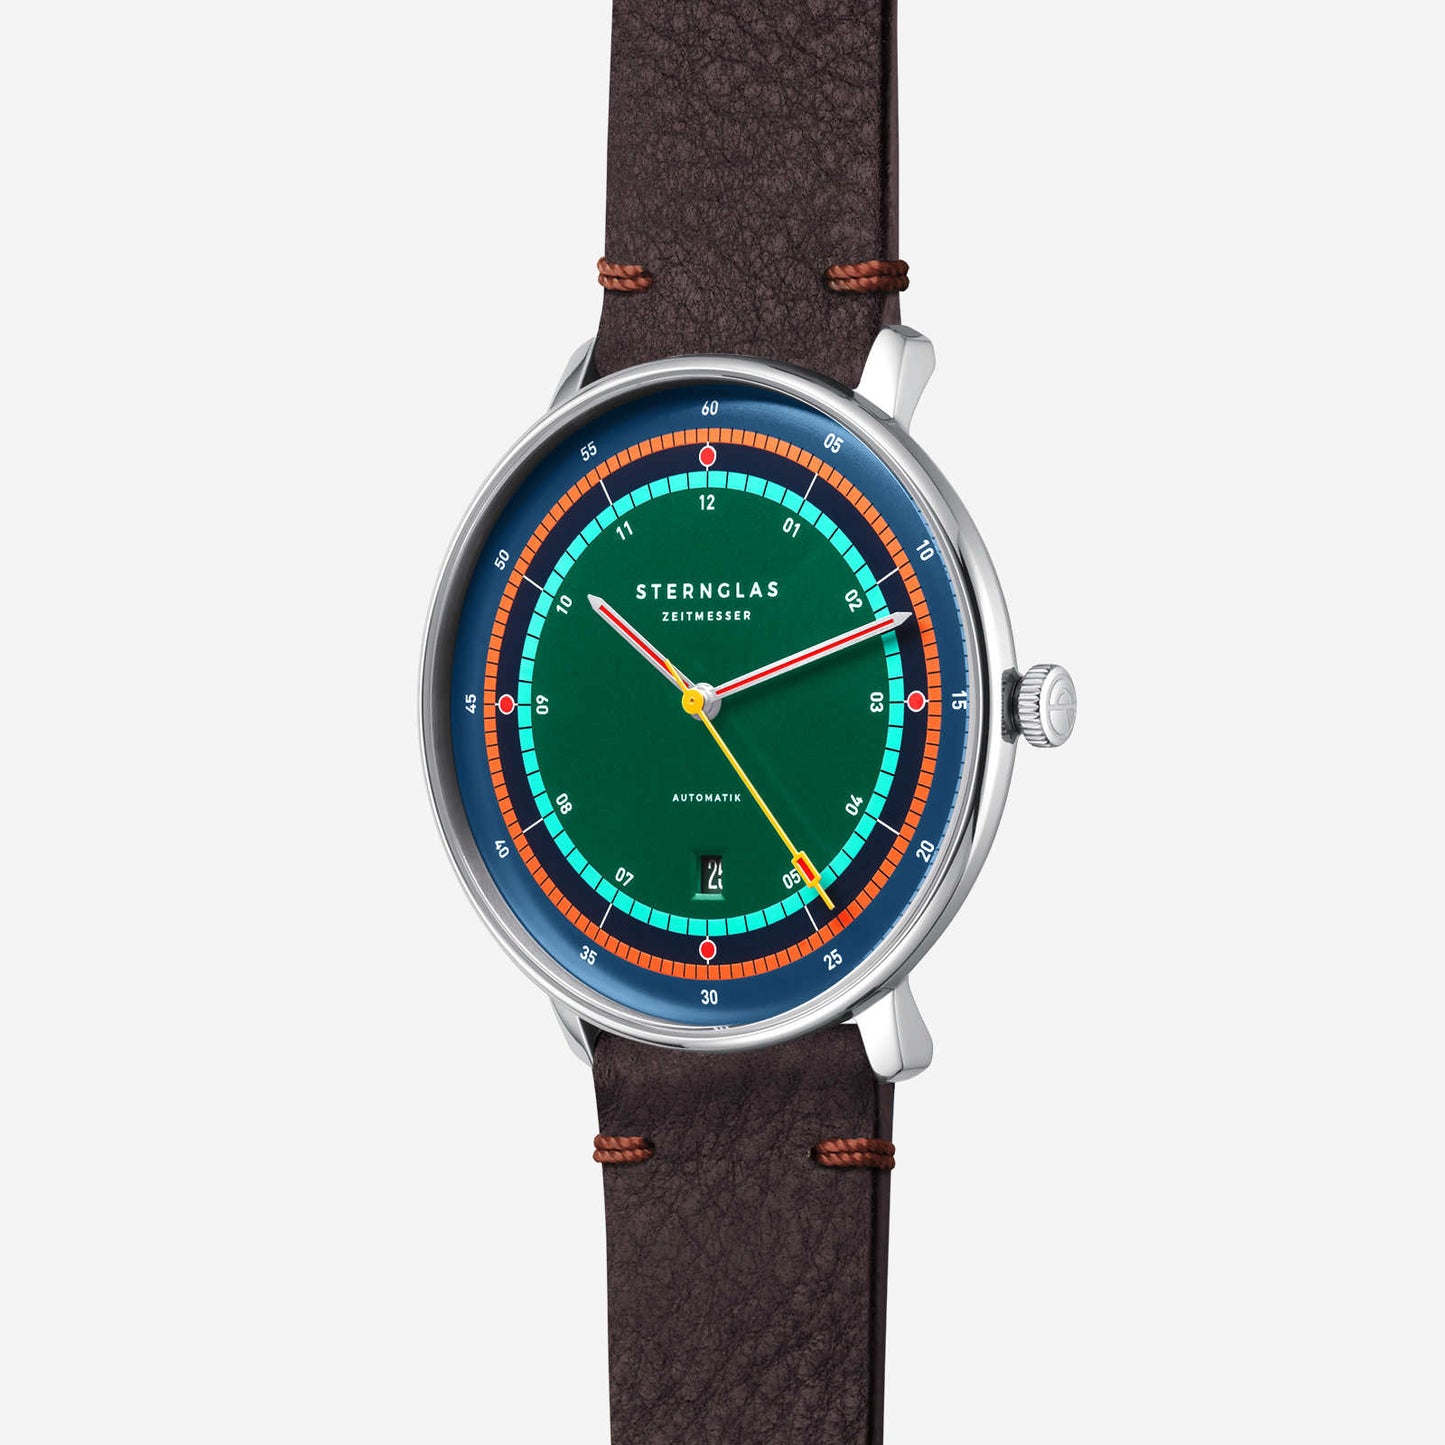 popup|Curved dial|The high-contrast satin-finish dial with fine curvature gives the model a colourful character.